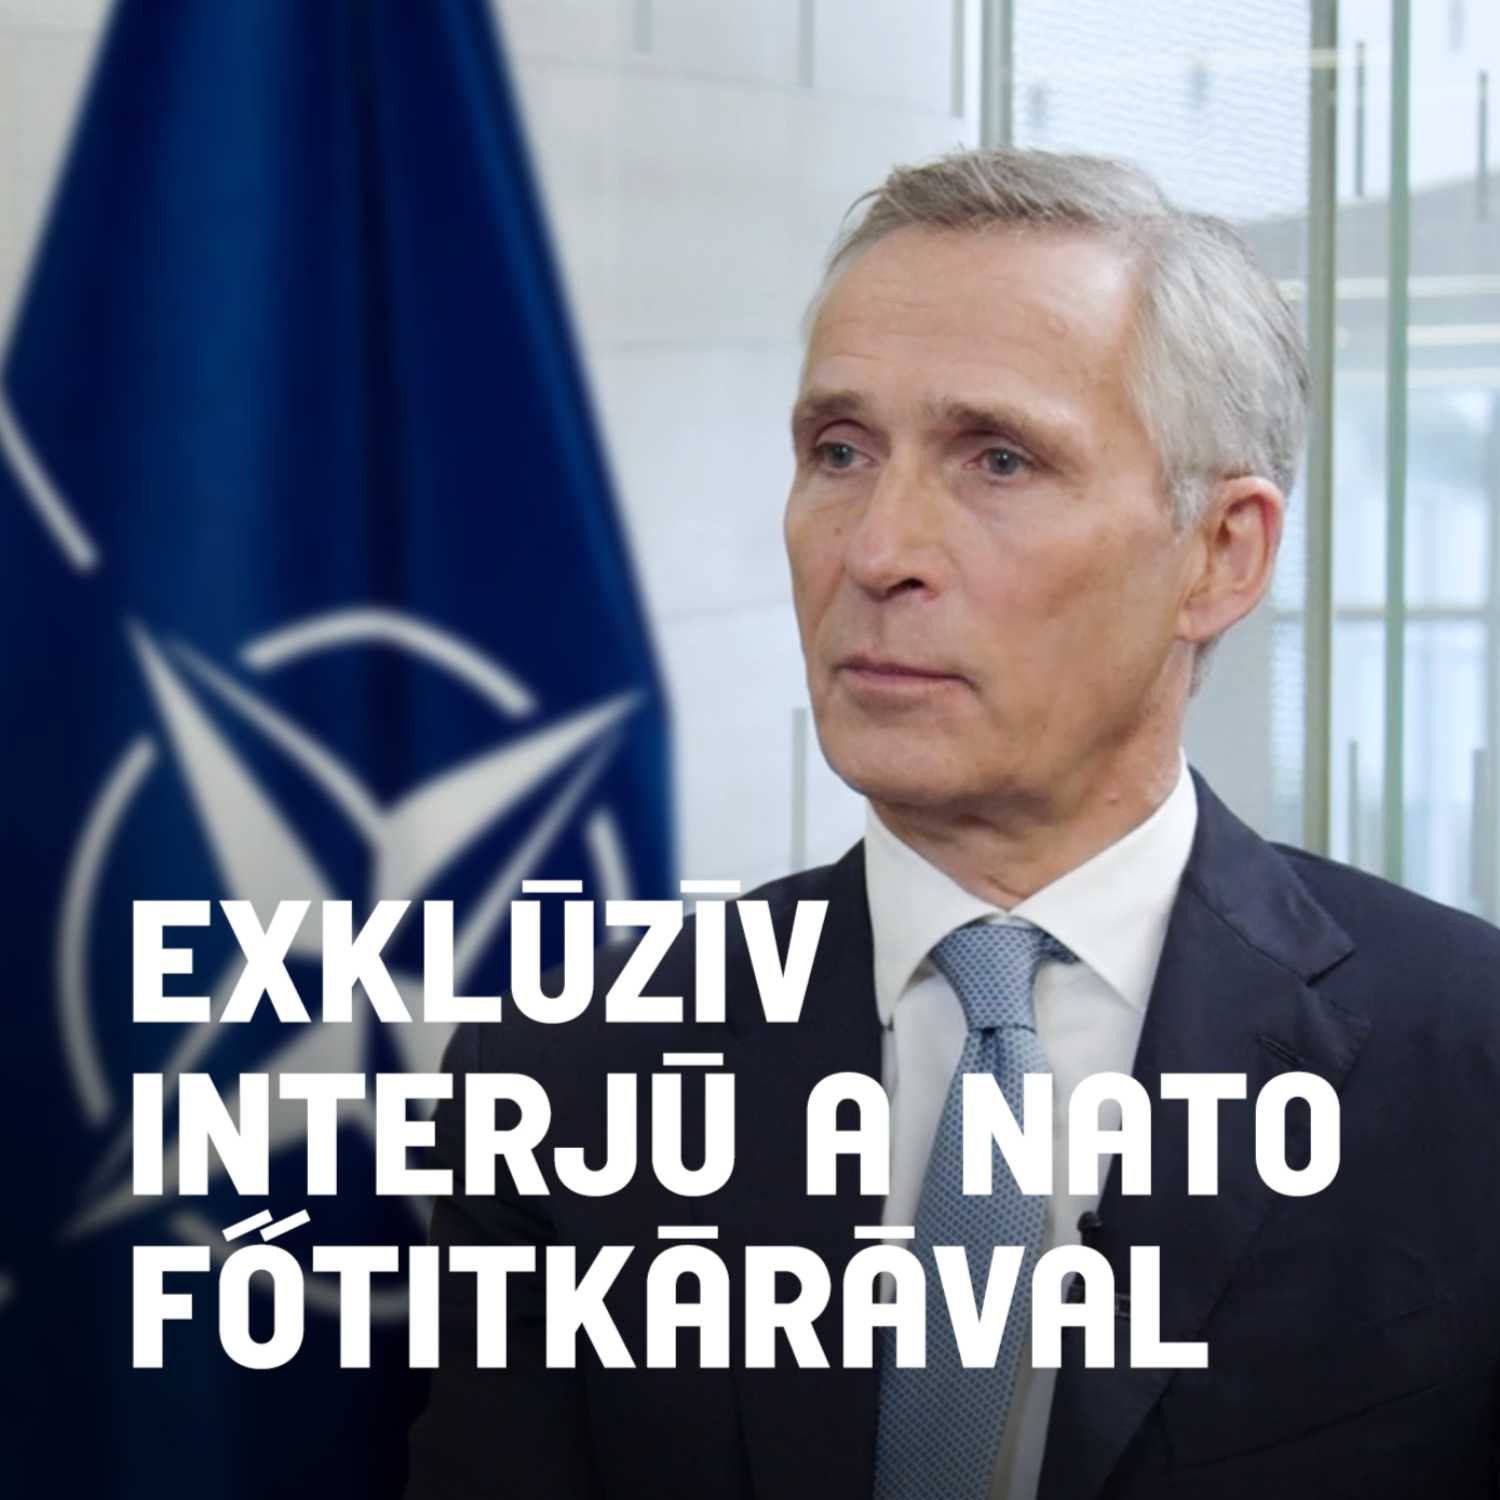 Interview with Jens Stoltenberg: We knew since the fall of 2021 that Putin would attack